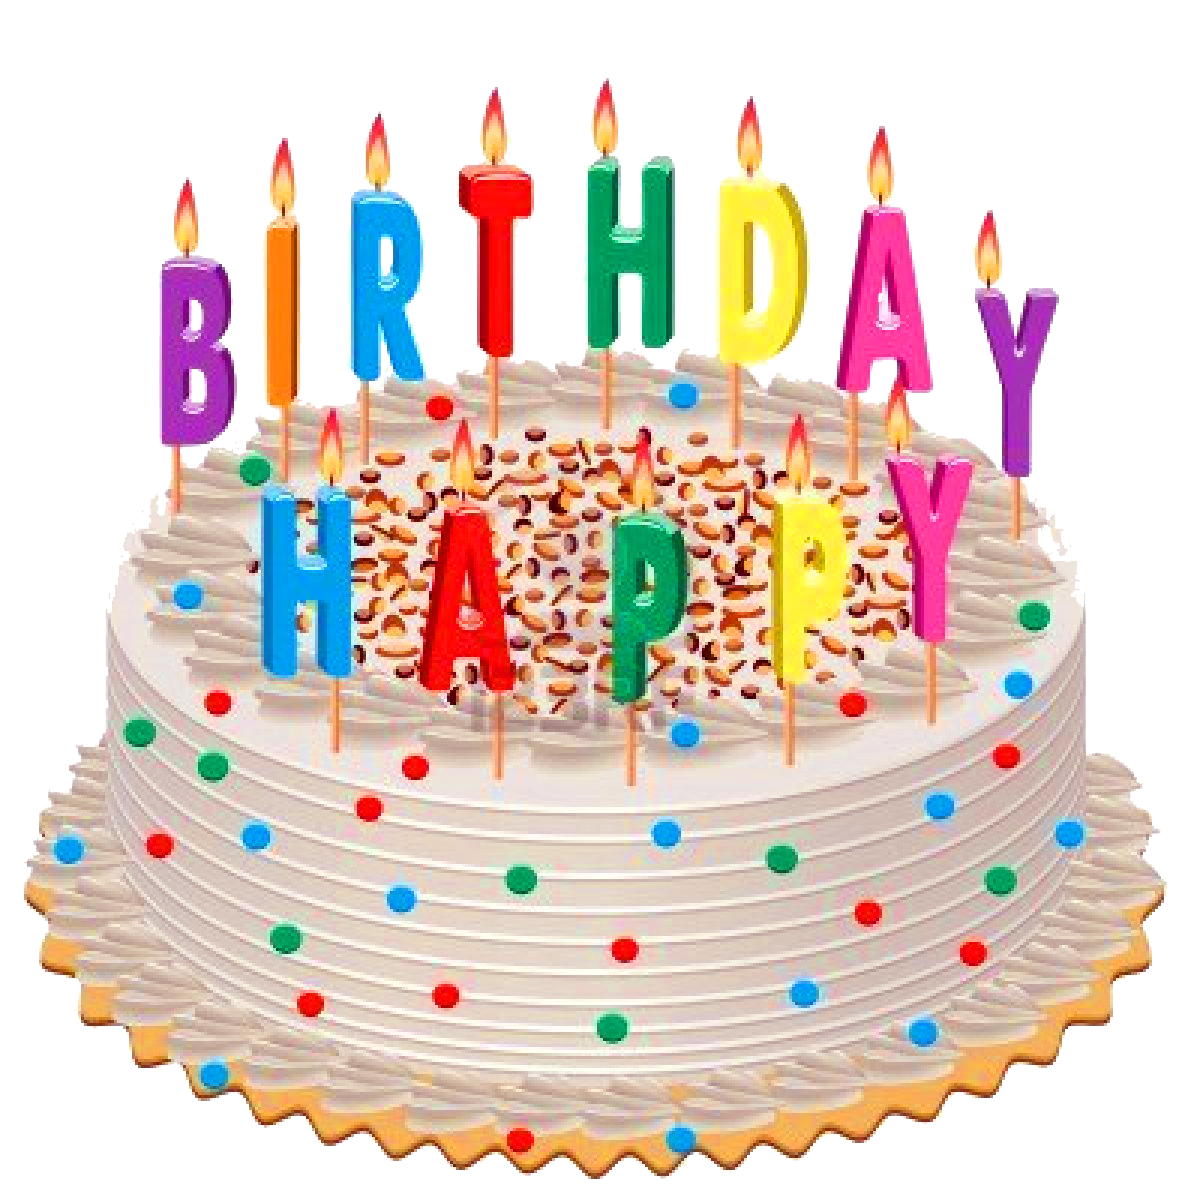 Birthday Cake Png - ClipArt Best